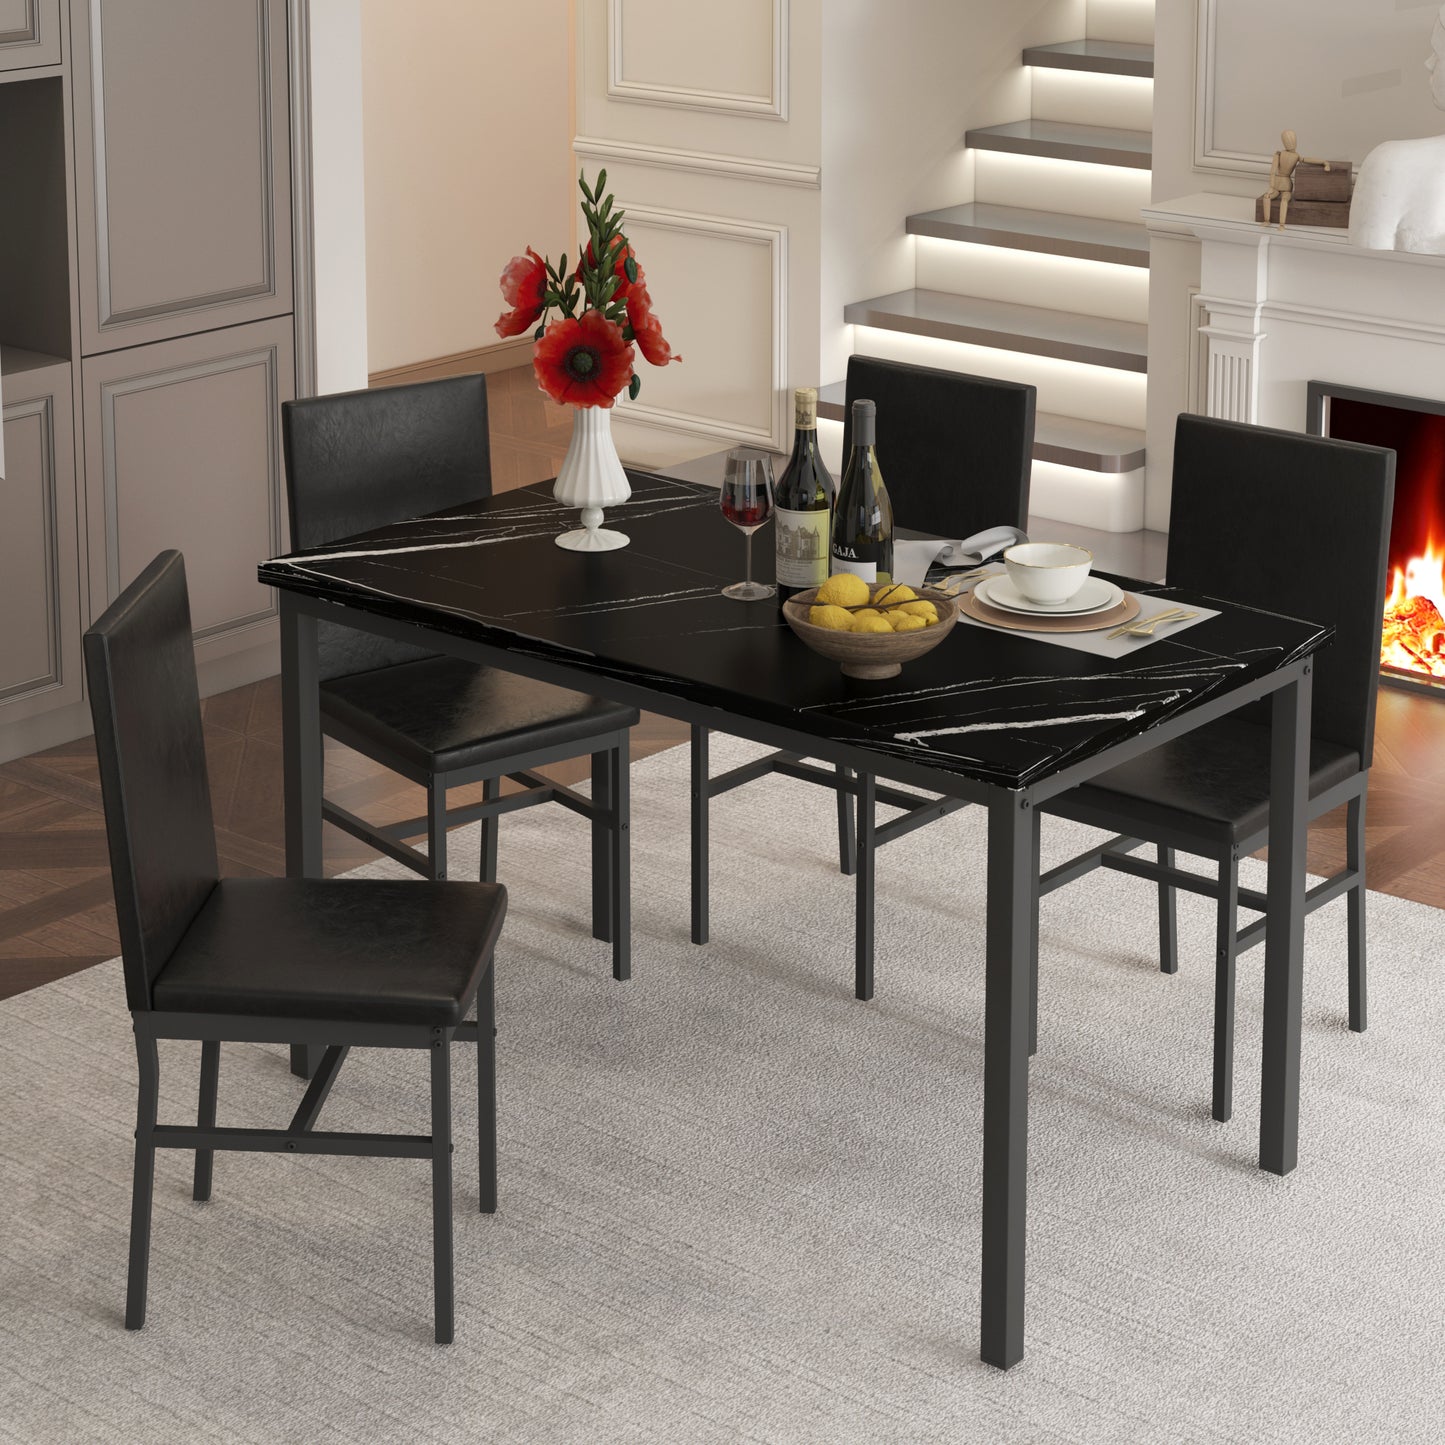 SYNGAR 7 Piece Dining Table Set, Kitchen Dining Table and Chairs Set for 6, Modern Marble Table and 4 PU Leather Upholstered Chairs, Home Dining Set for Small Space, Breakfast Nook, D9210